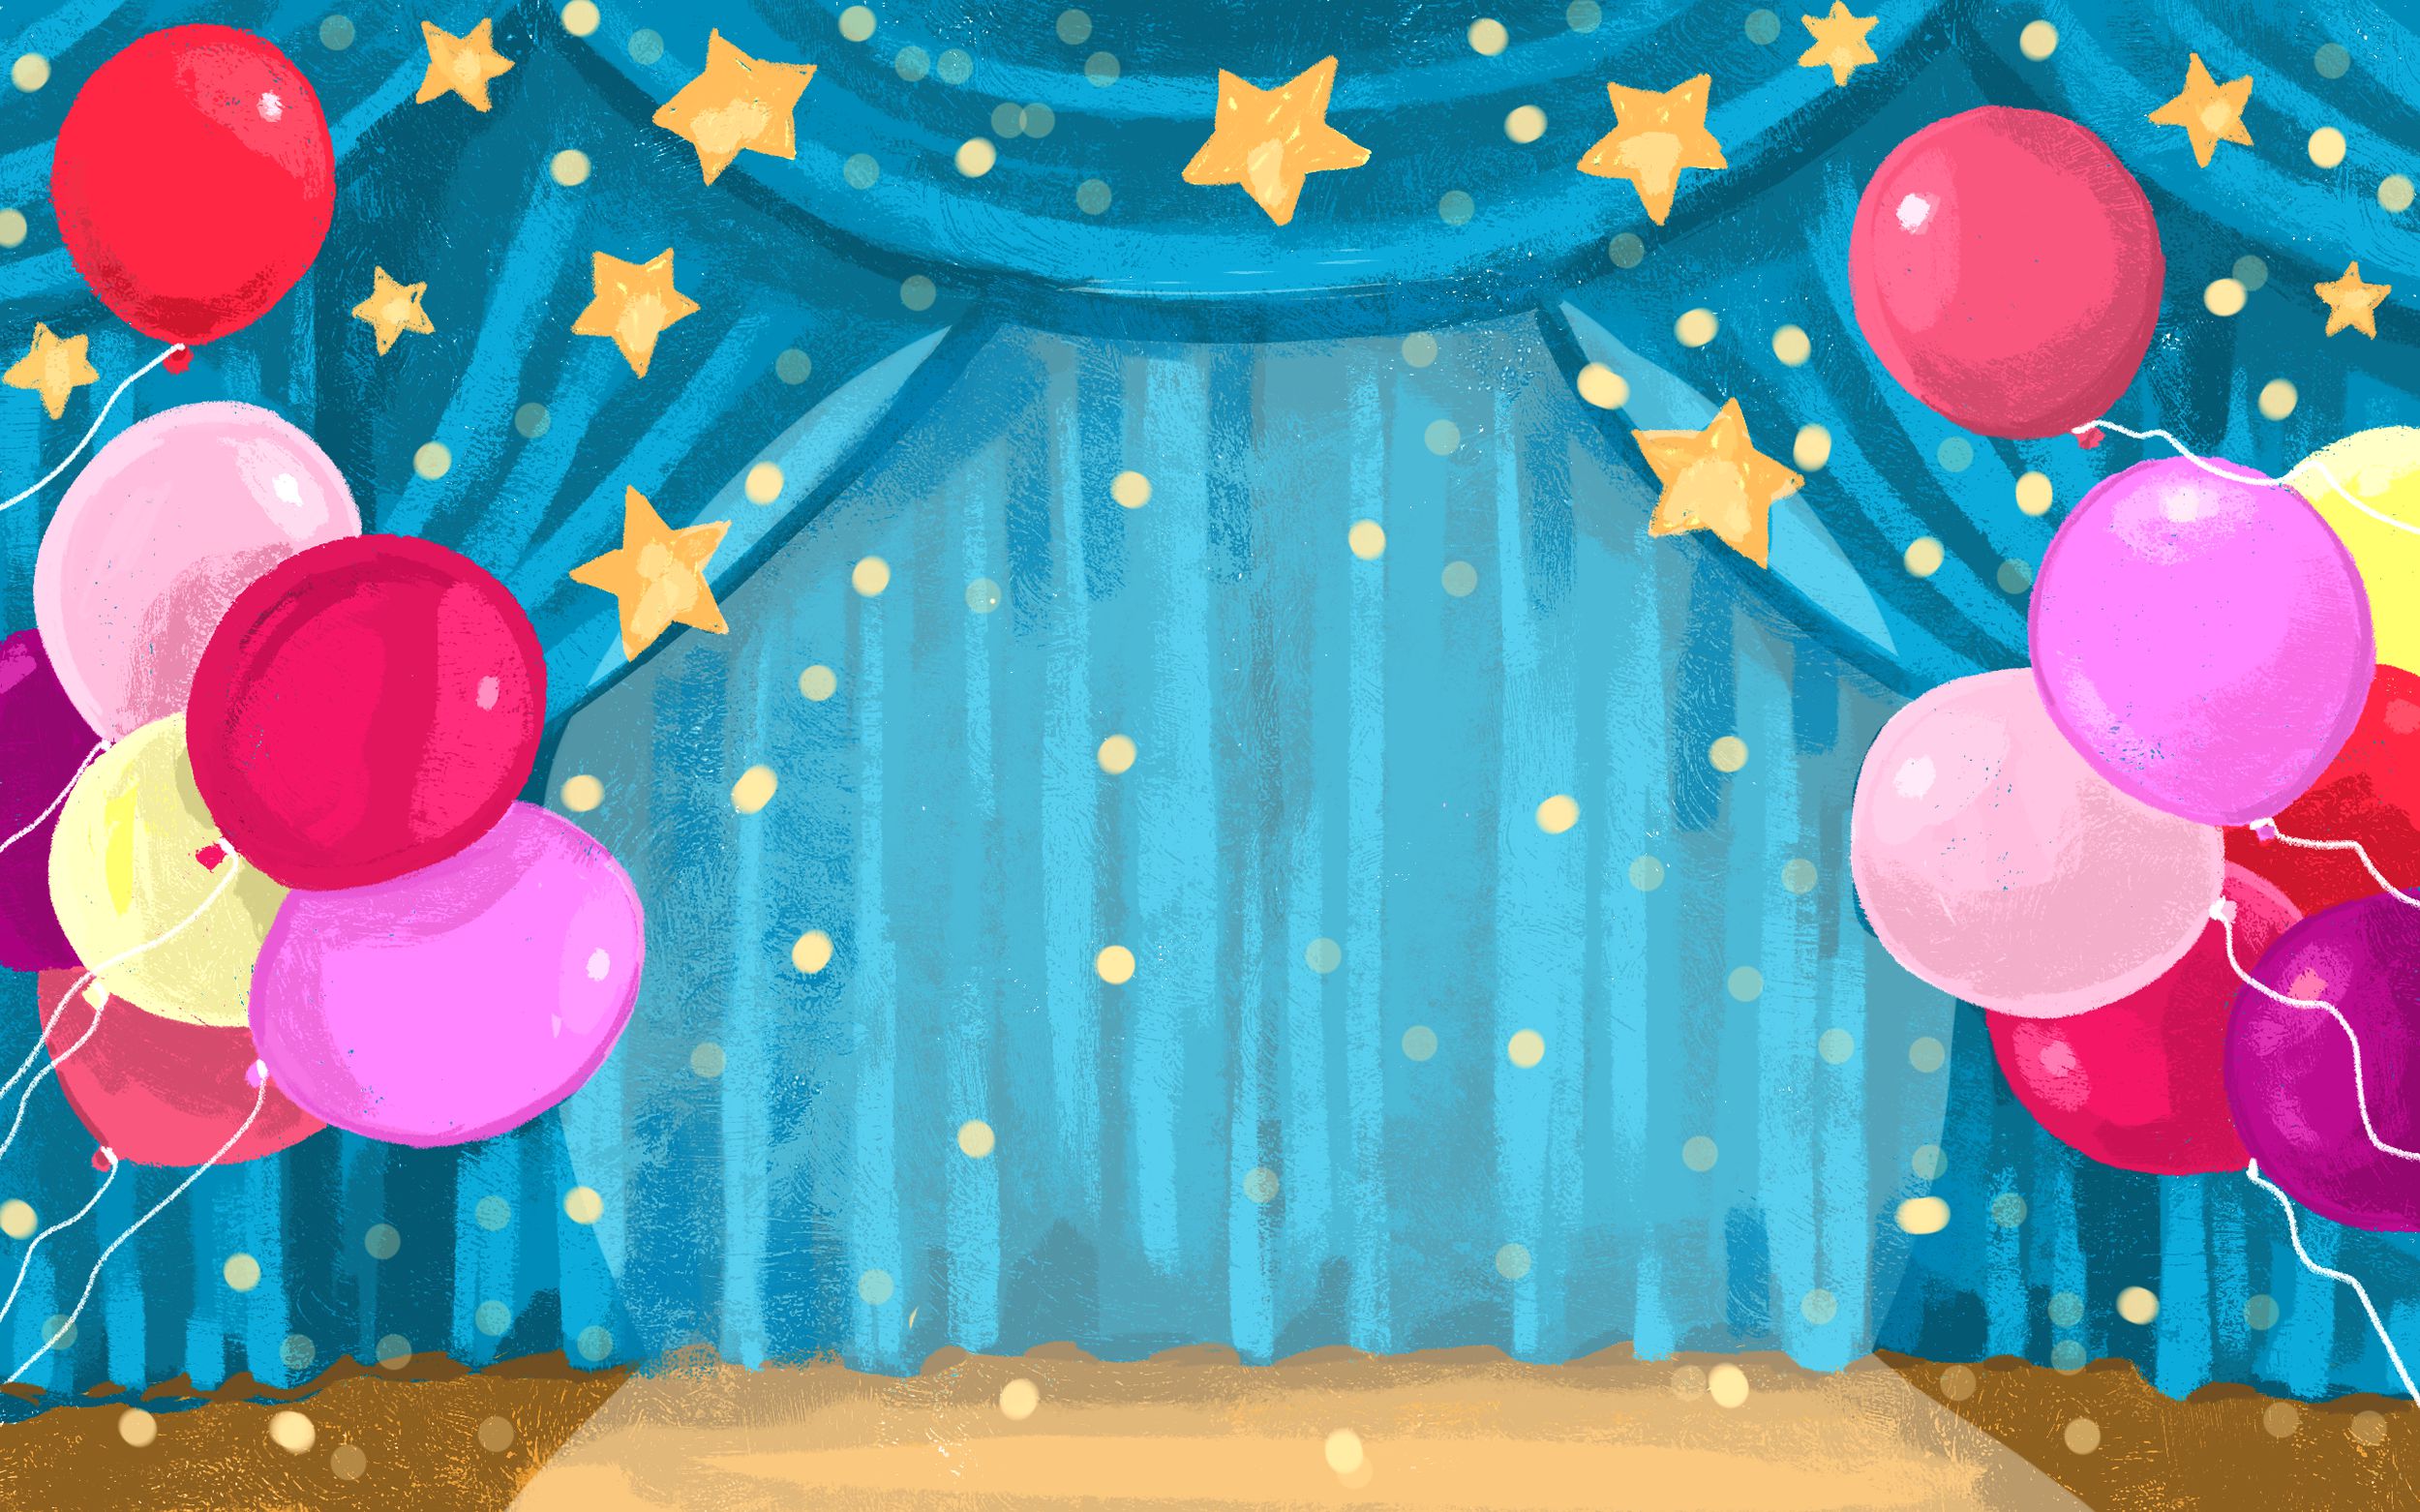 Foxdog - 25 Awesome Backgrounds for Your Zoom Birthday Party